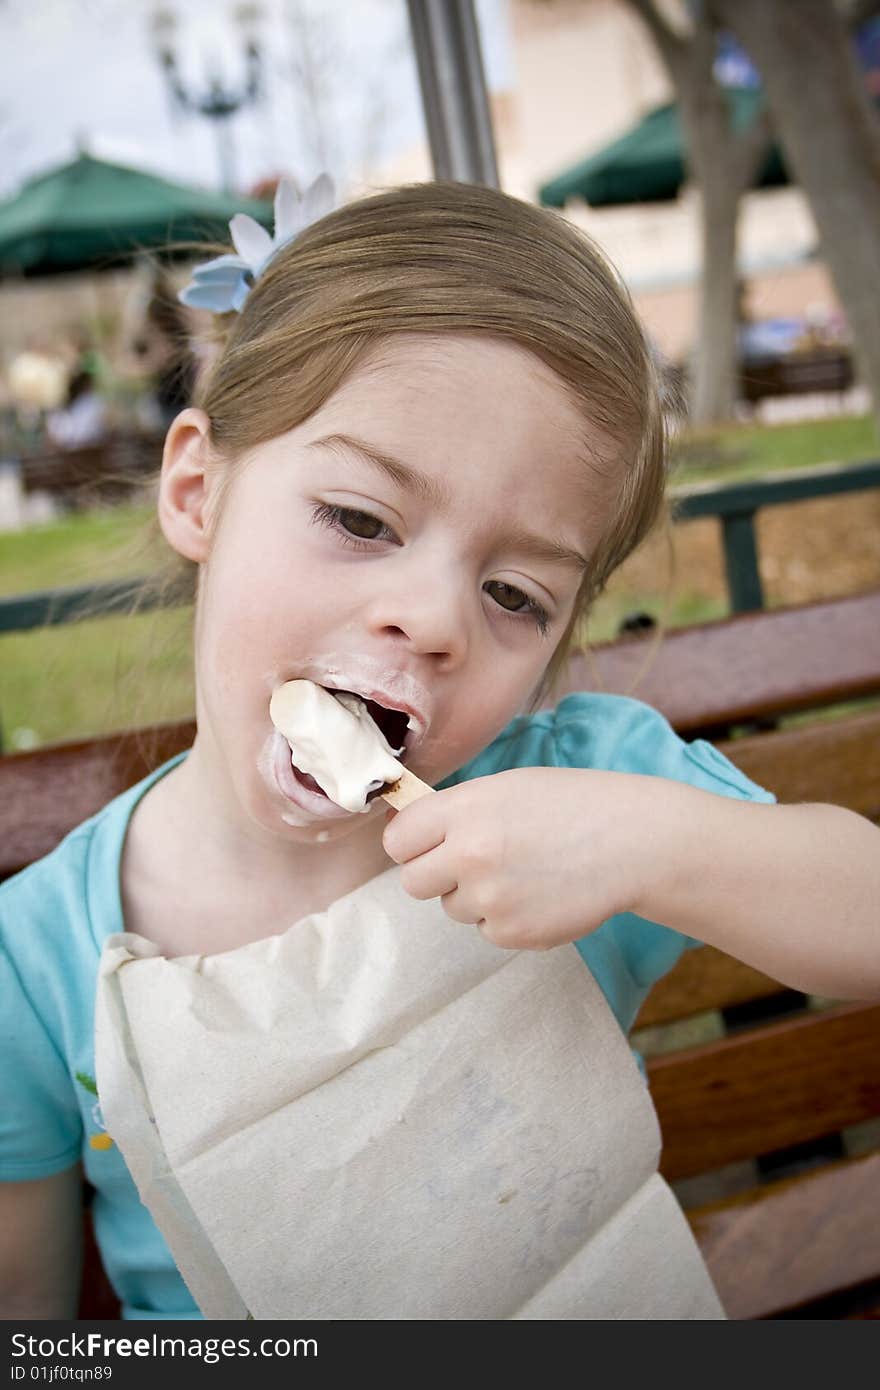 A cute little girl eats her ice cream treat at the park and gets a bit messy in the process. A cute little girl eats her ice cream treat at the park and gets a bit messy in the process